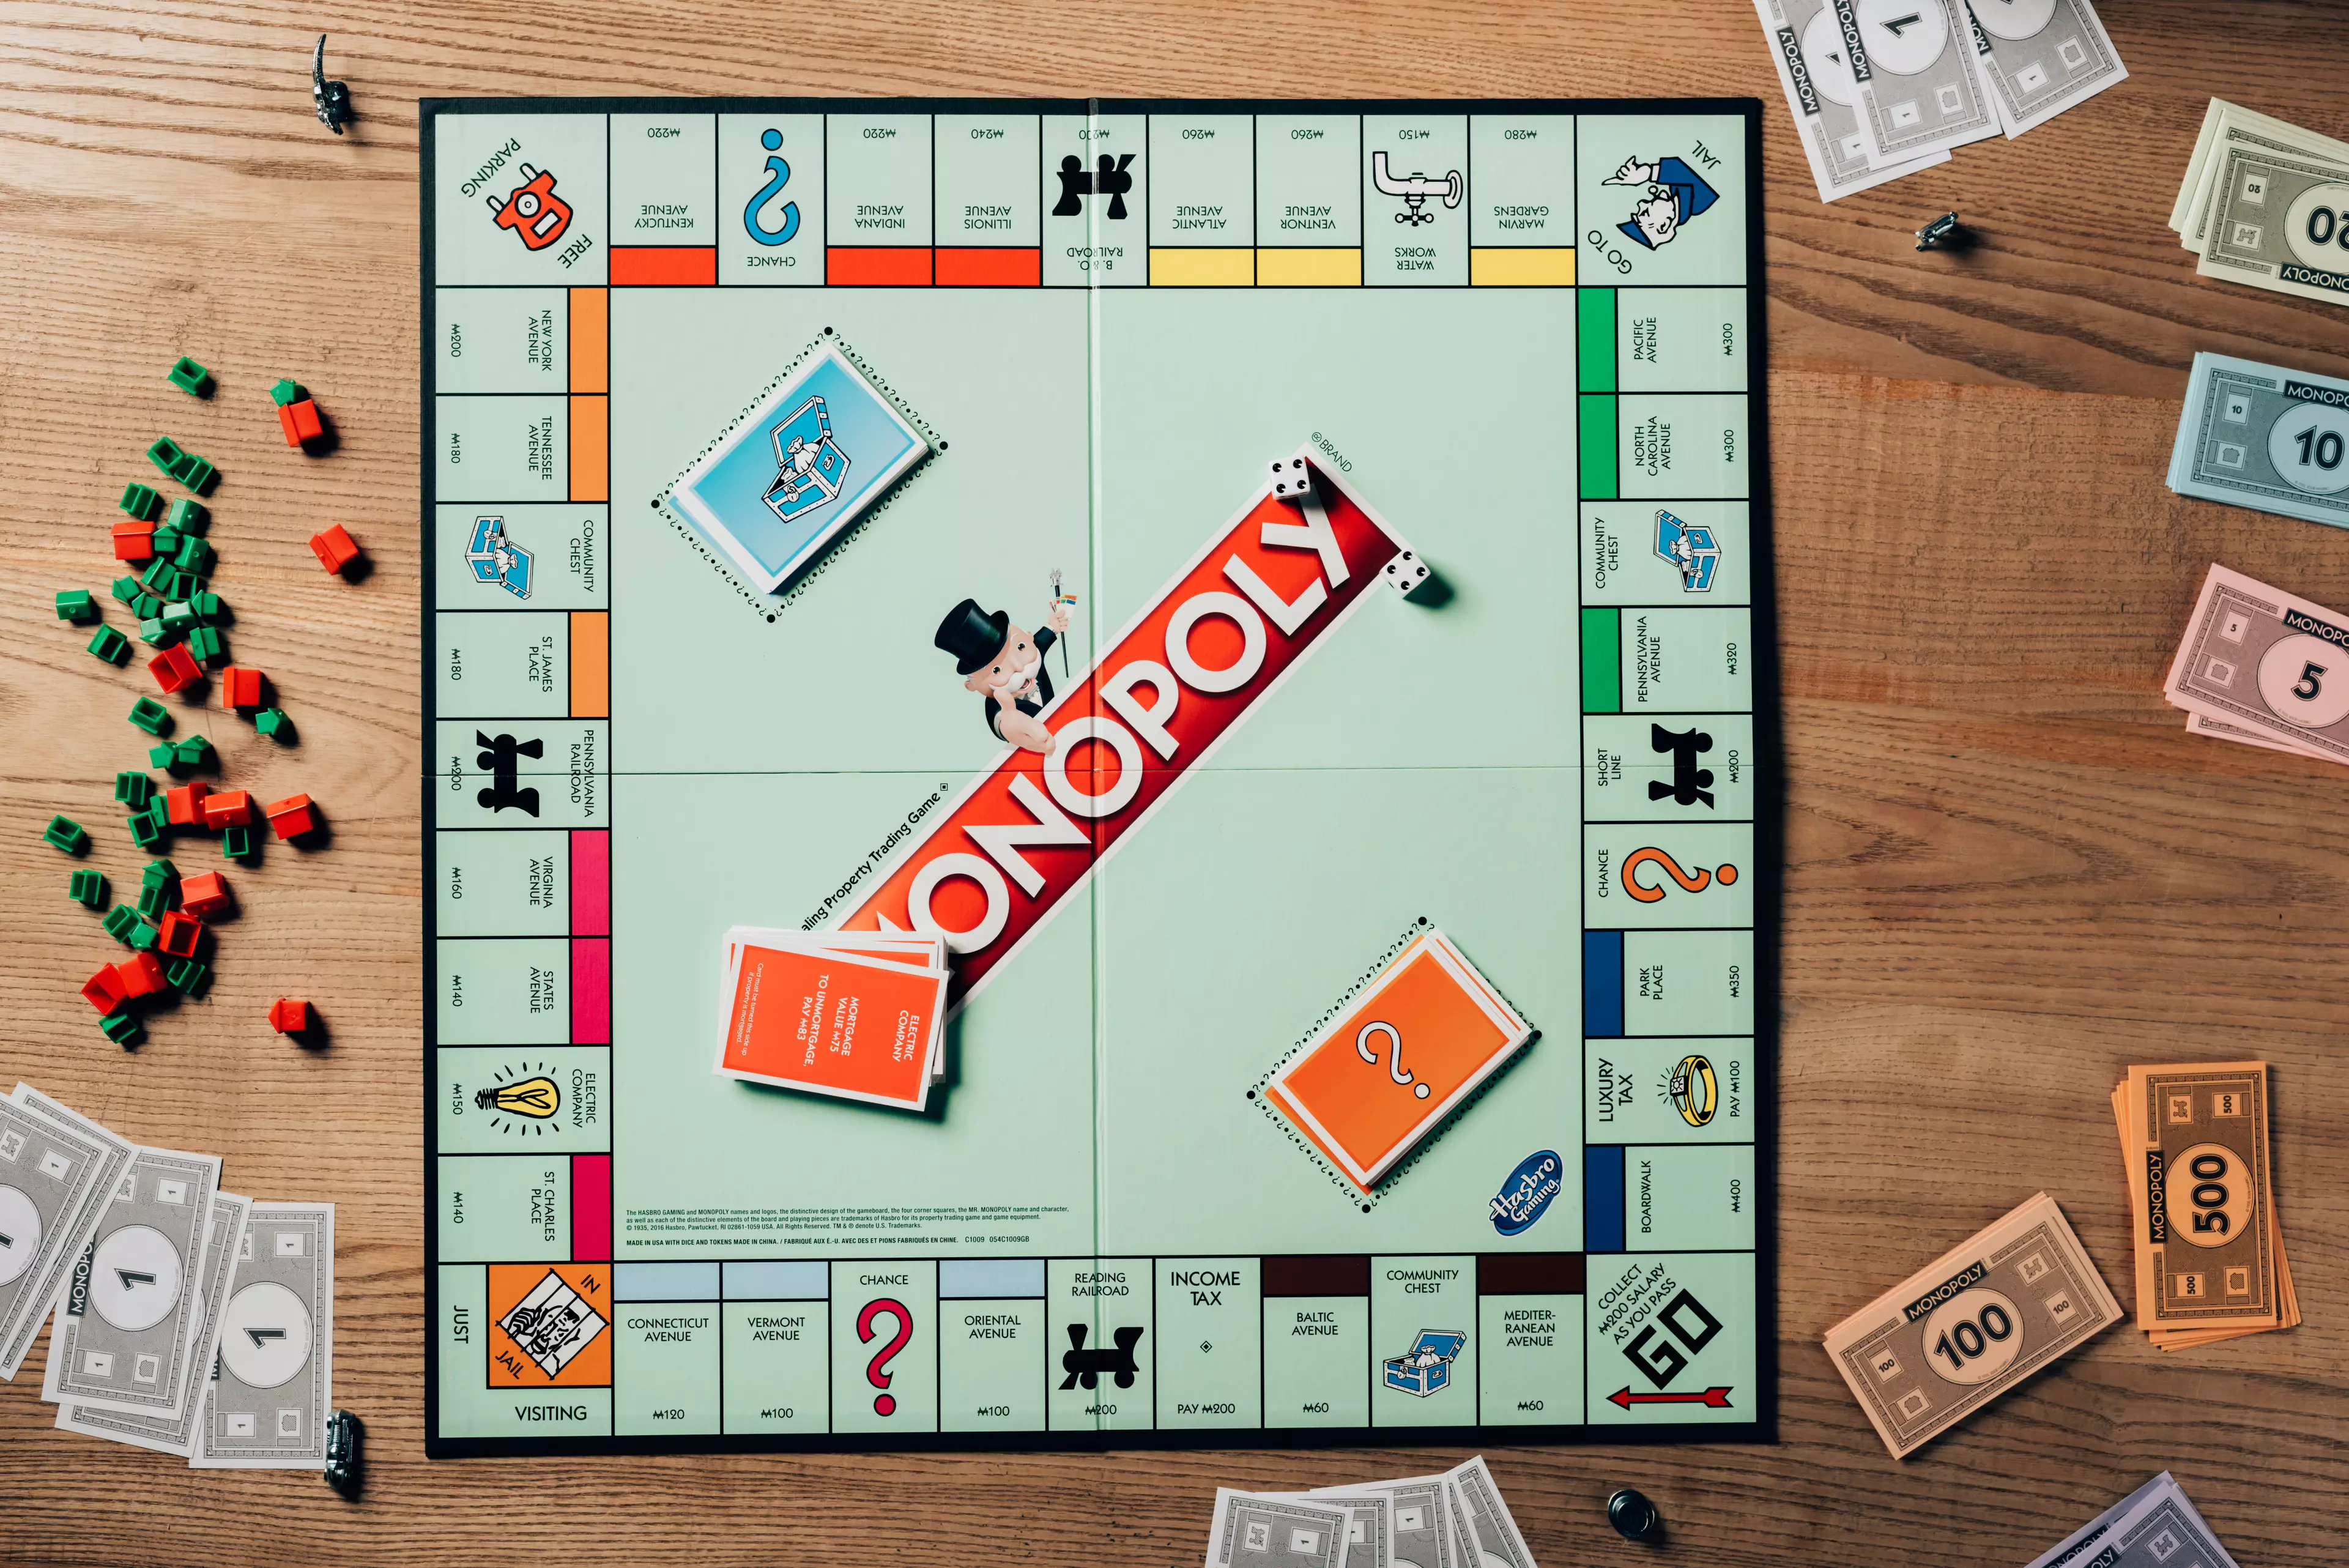 The Monopoly game is interactive and will take place in London (